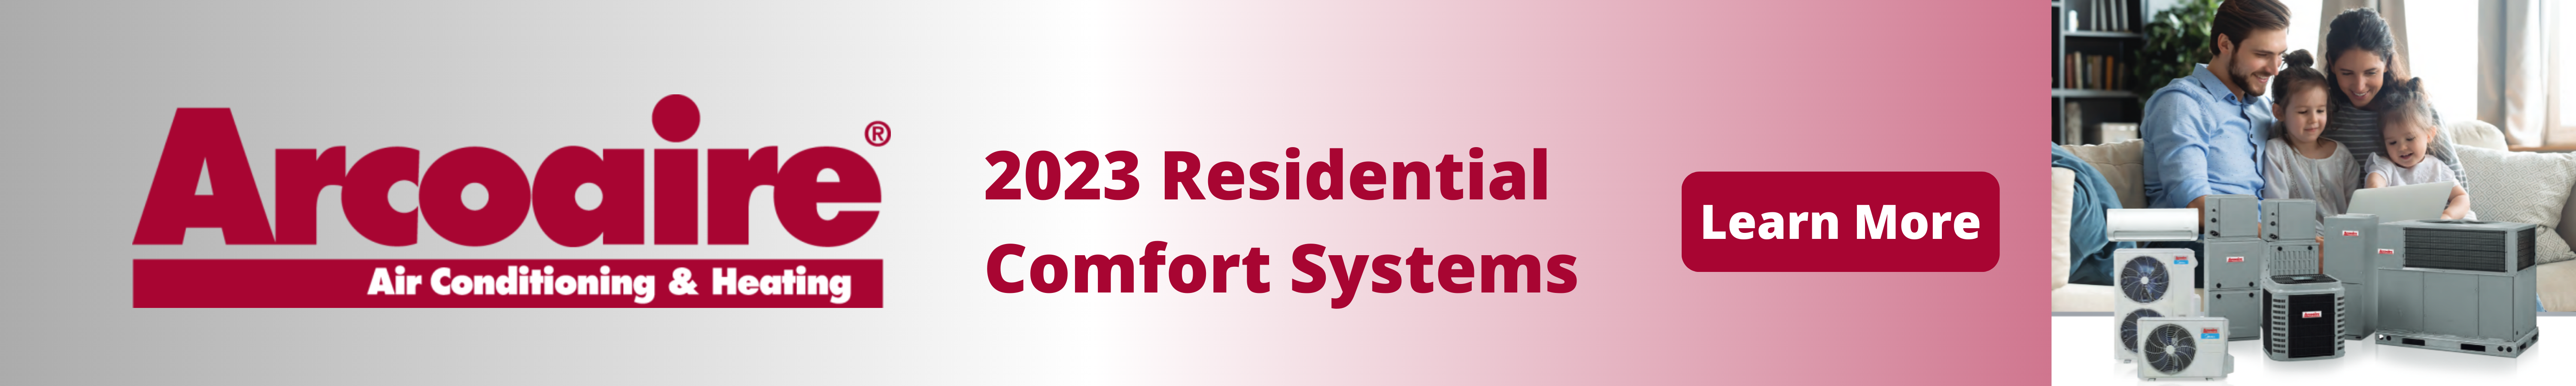 Arcoaire 2023 Residential Comfort Systems